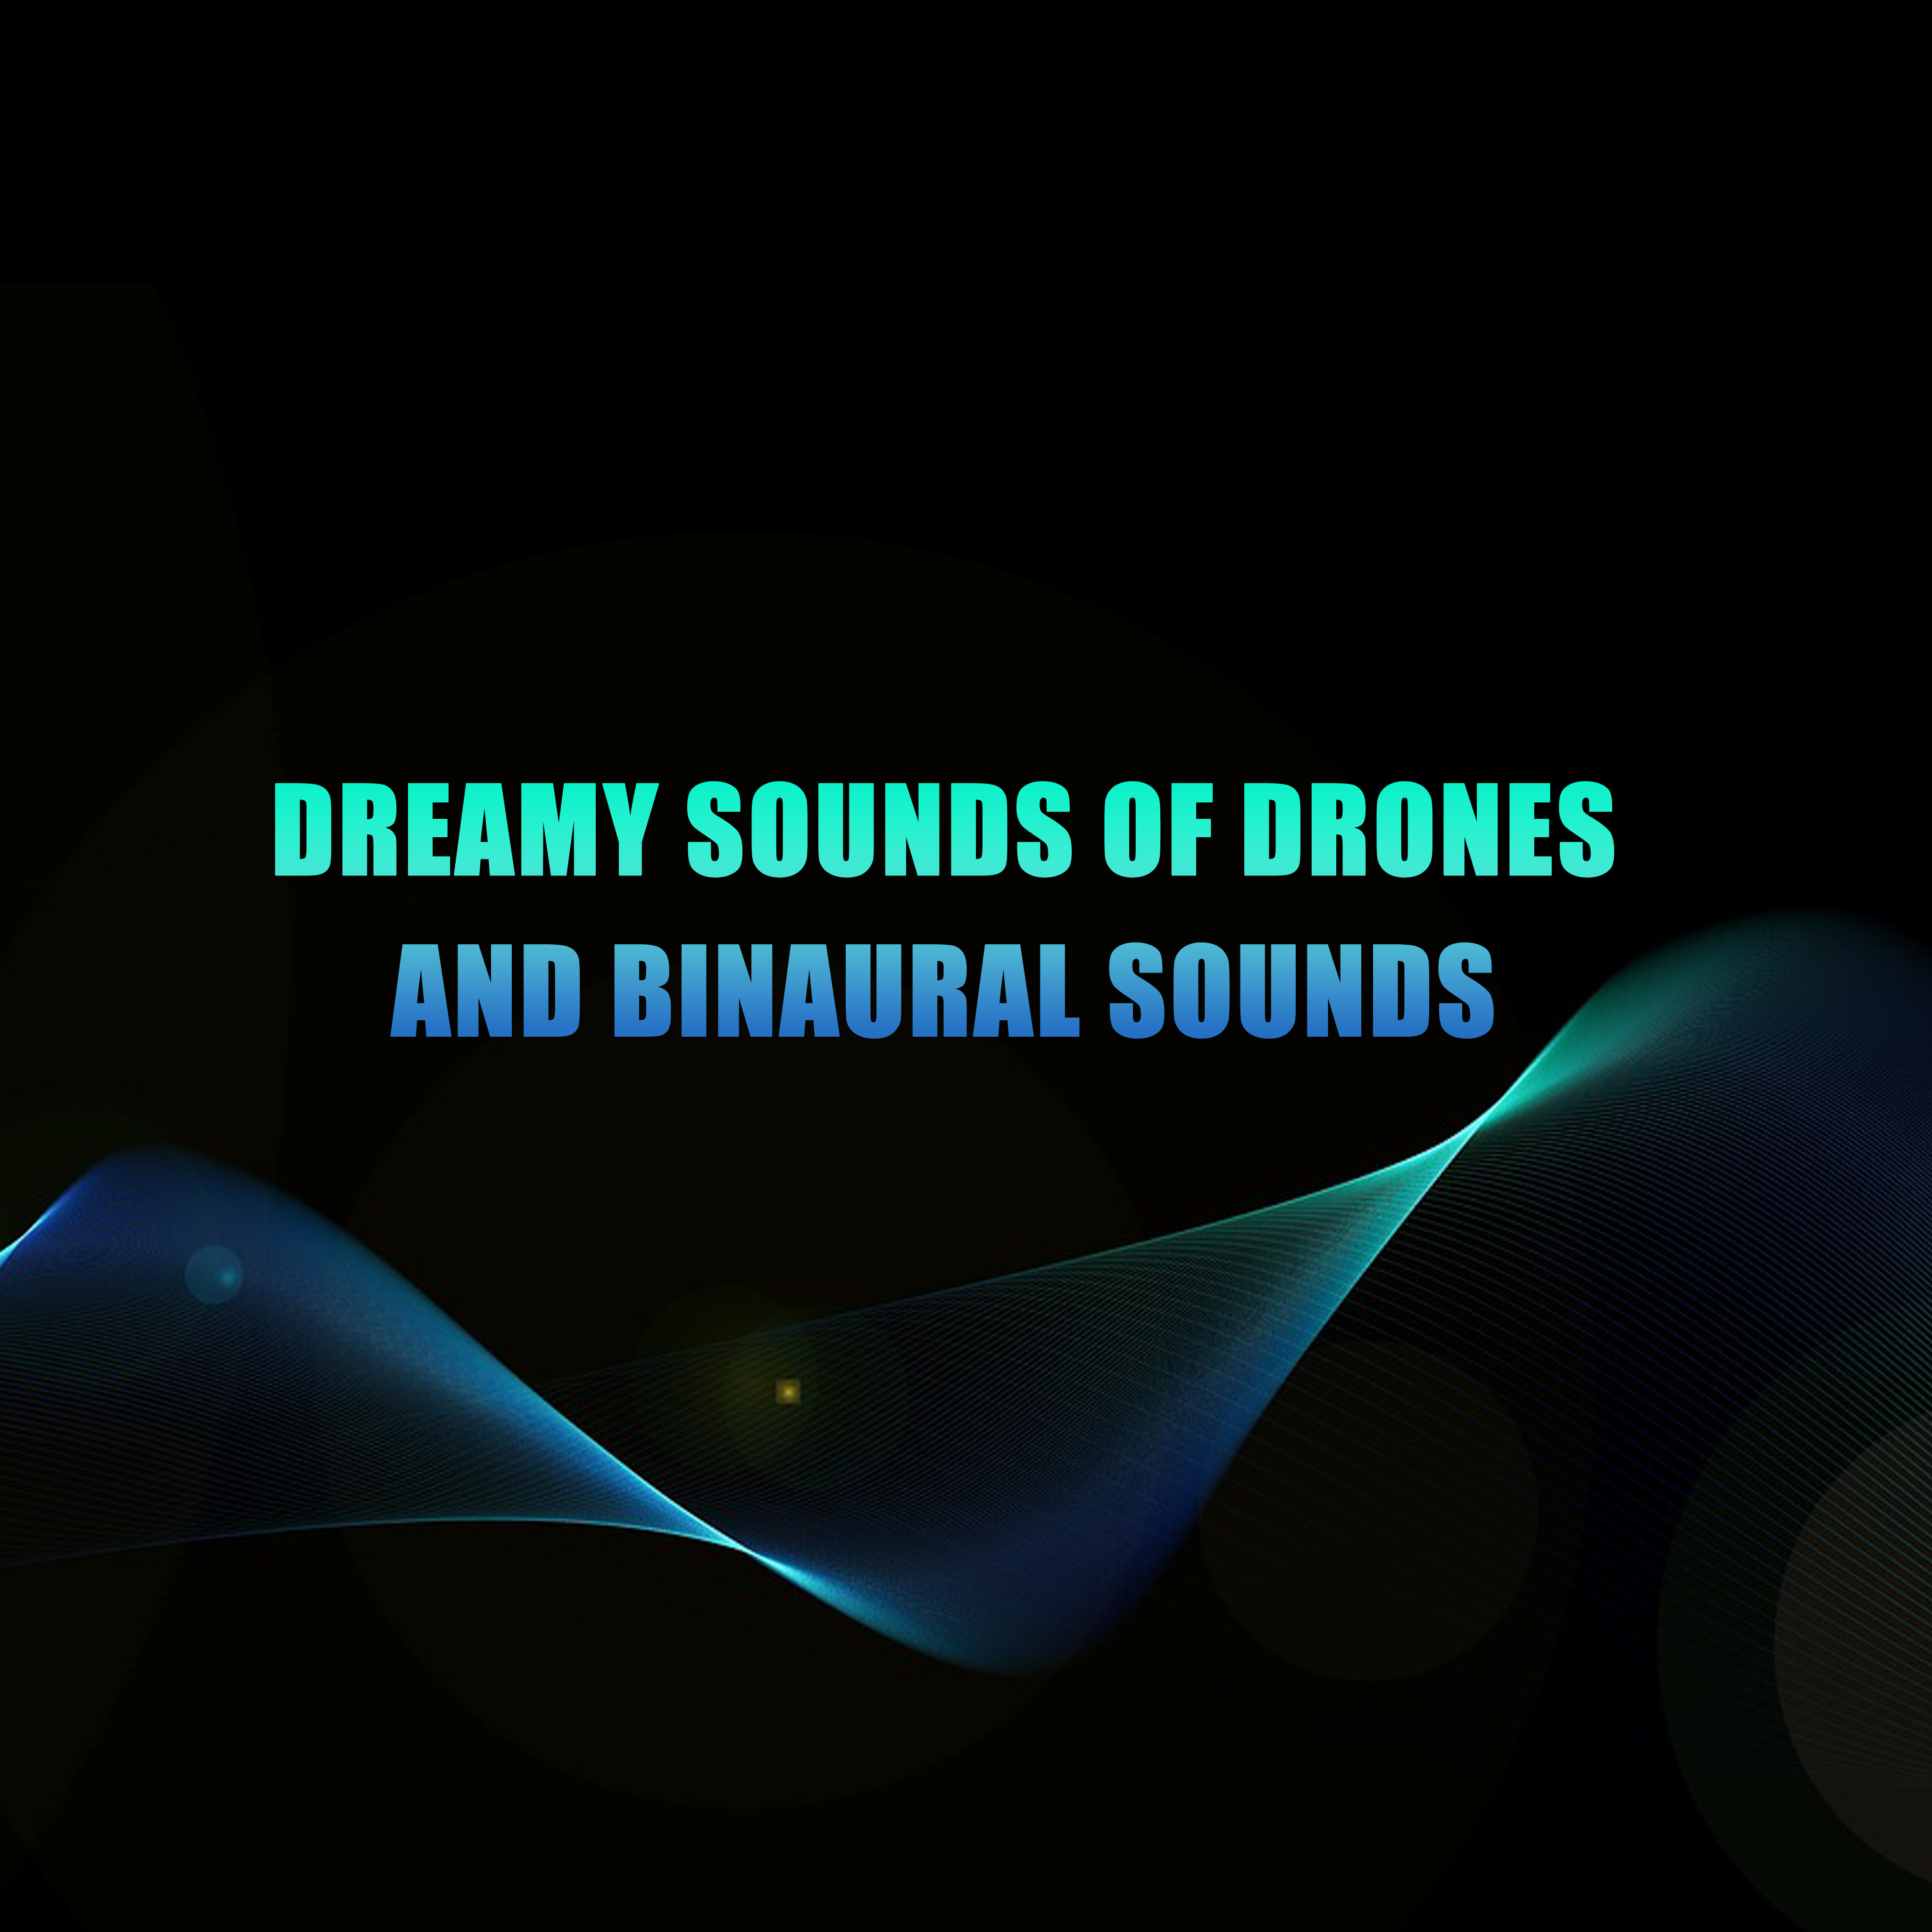 10 Dreamy Sounds of Drones and Binaural Sounds